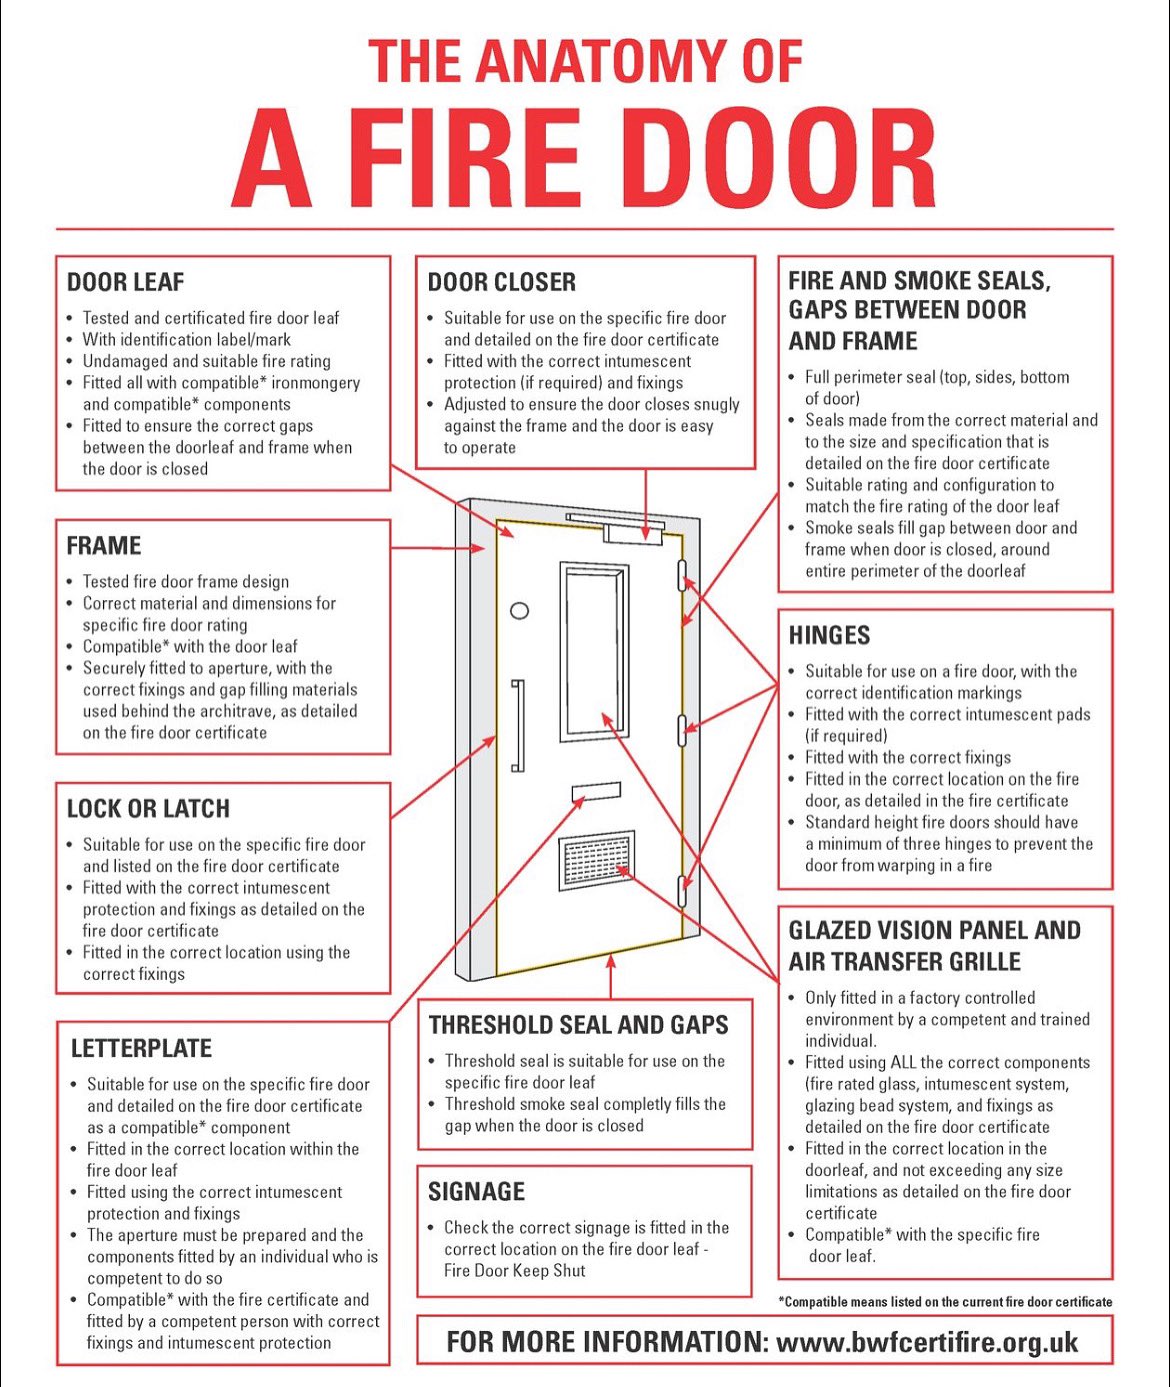 Anatomy of Fire Page